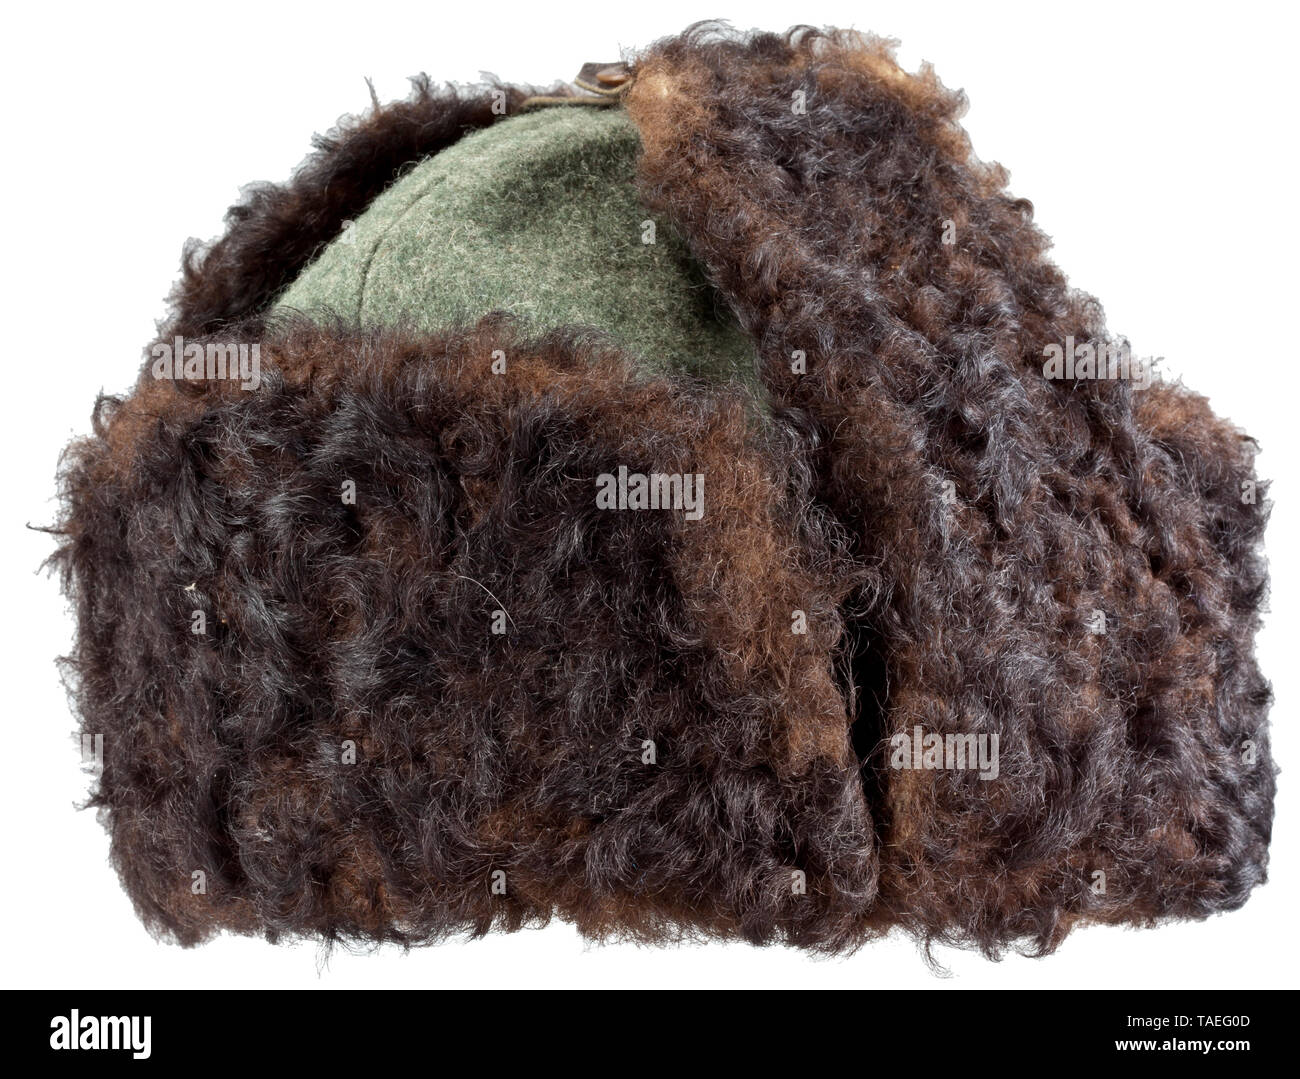 A winter cap for army members private purchase piece in a variant version historic, historical, army, armies, armed forces, military, militaria, object, objects, stills, clipping, clippings, cut out, cut-out, cut-outs, 20th century, Editorial-Use-Only Stock Photo